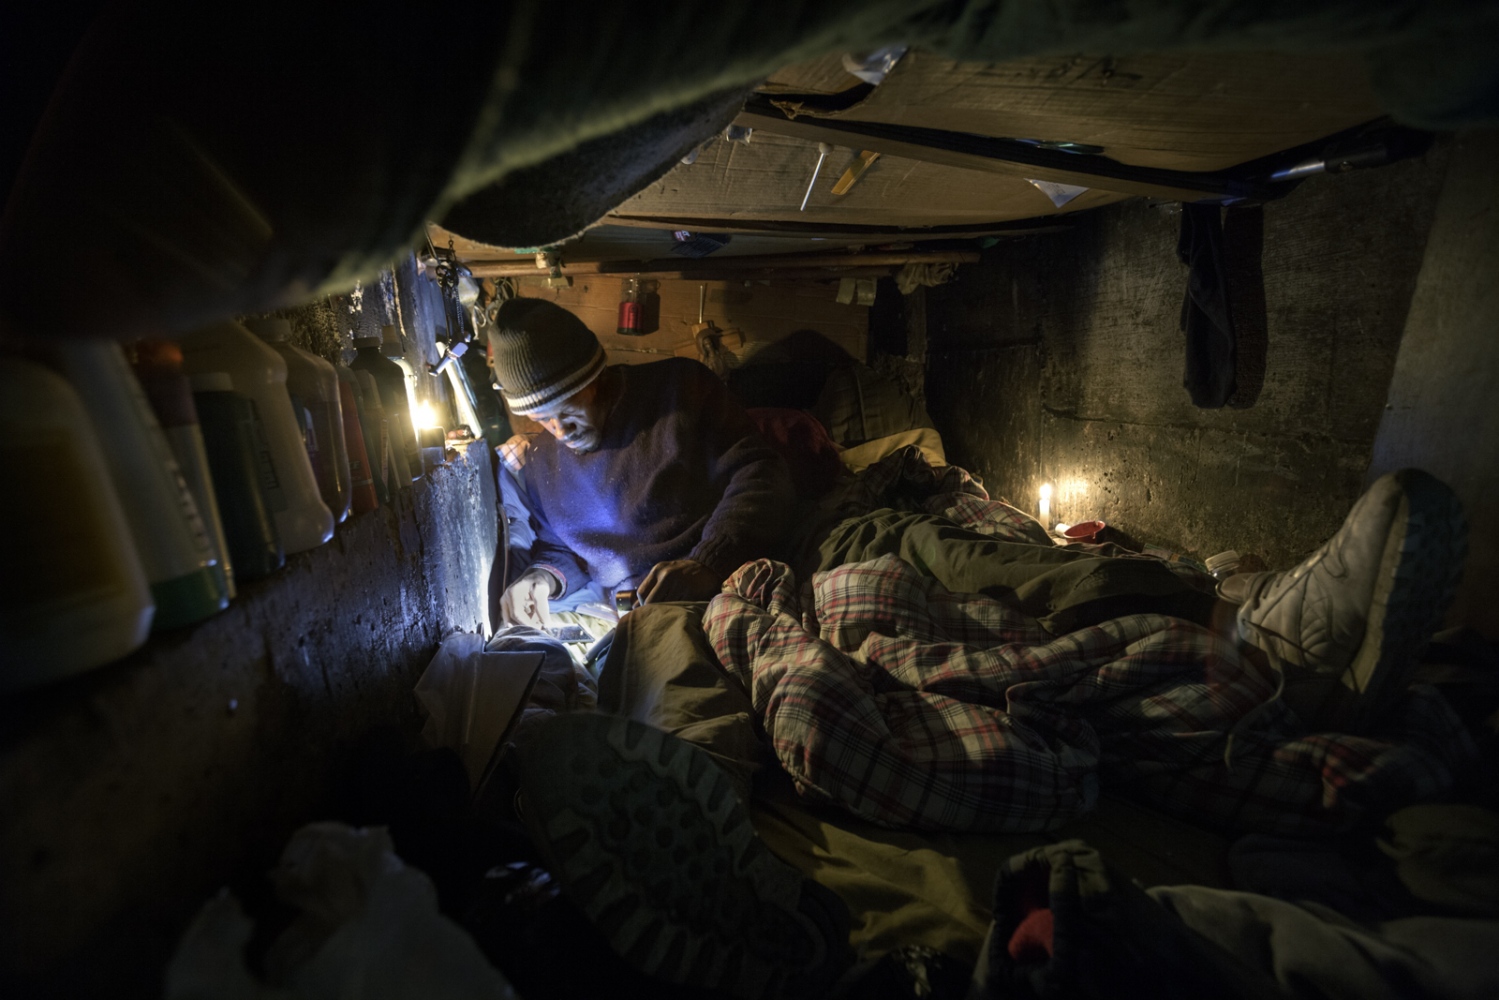 The Urban Cave -  Chuck shares this small home,  with his domestic partner...